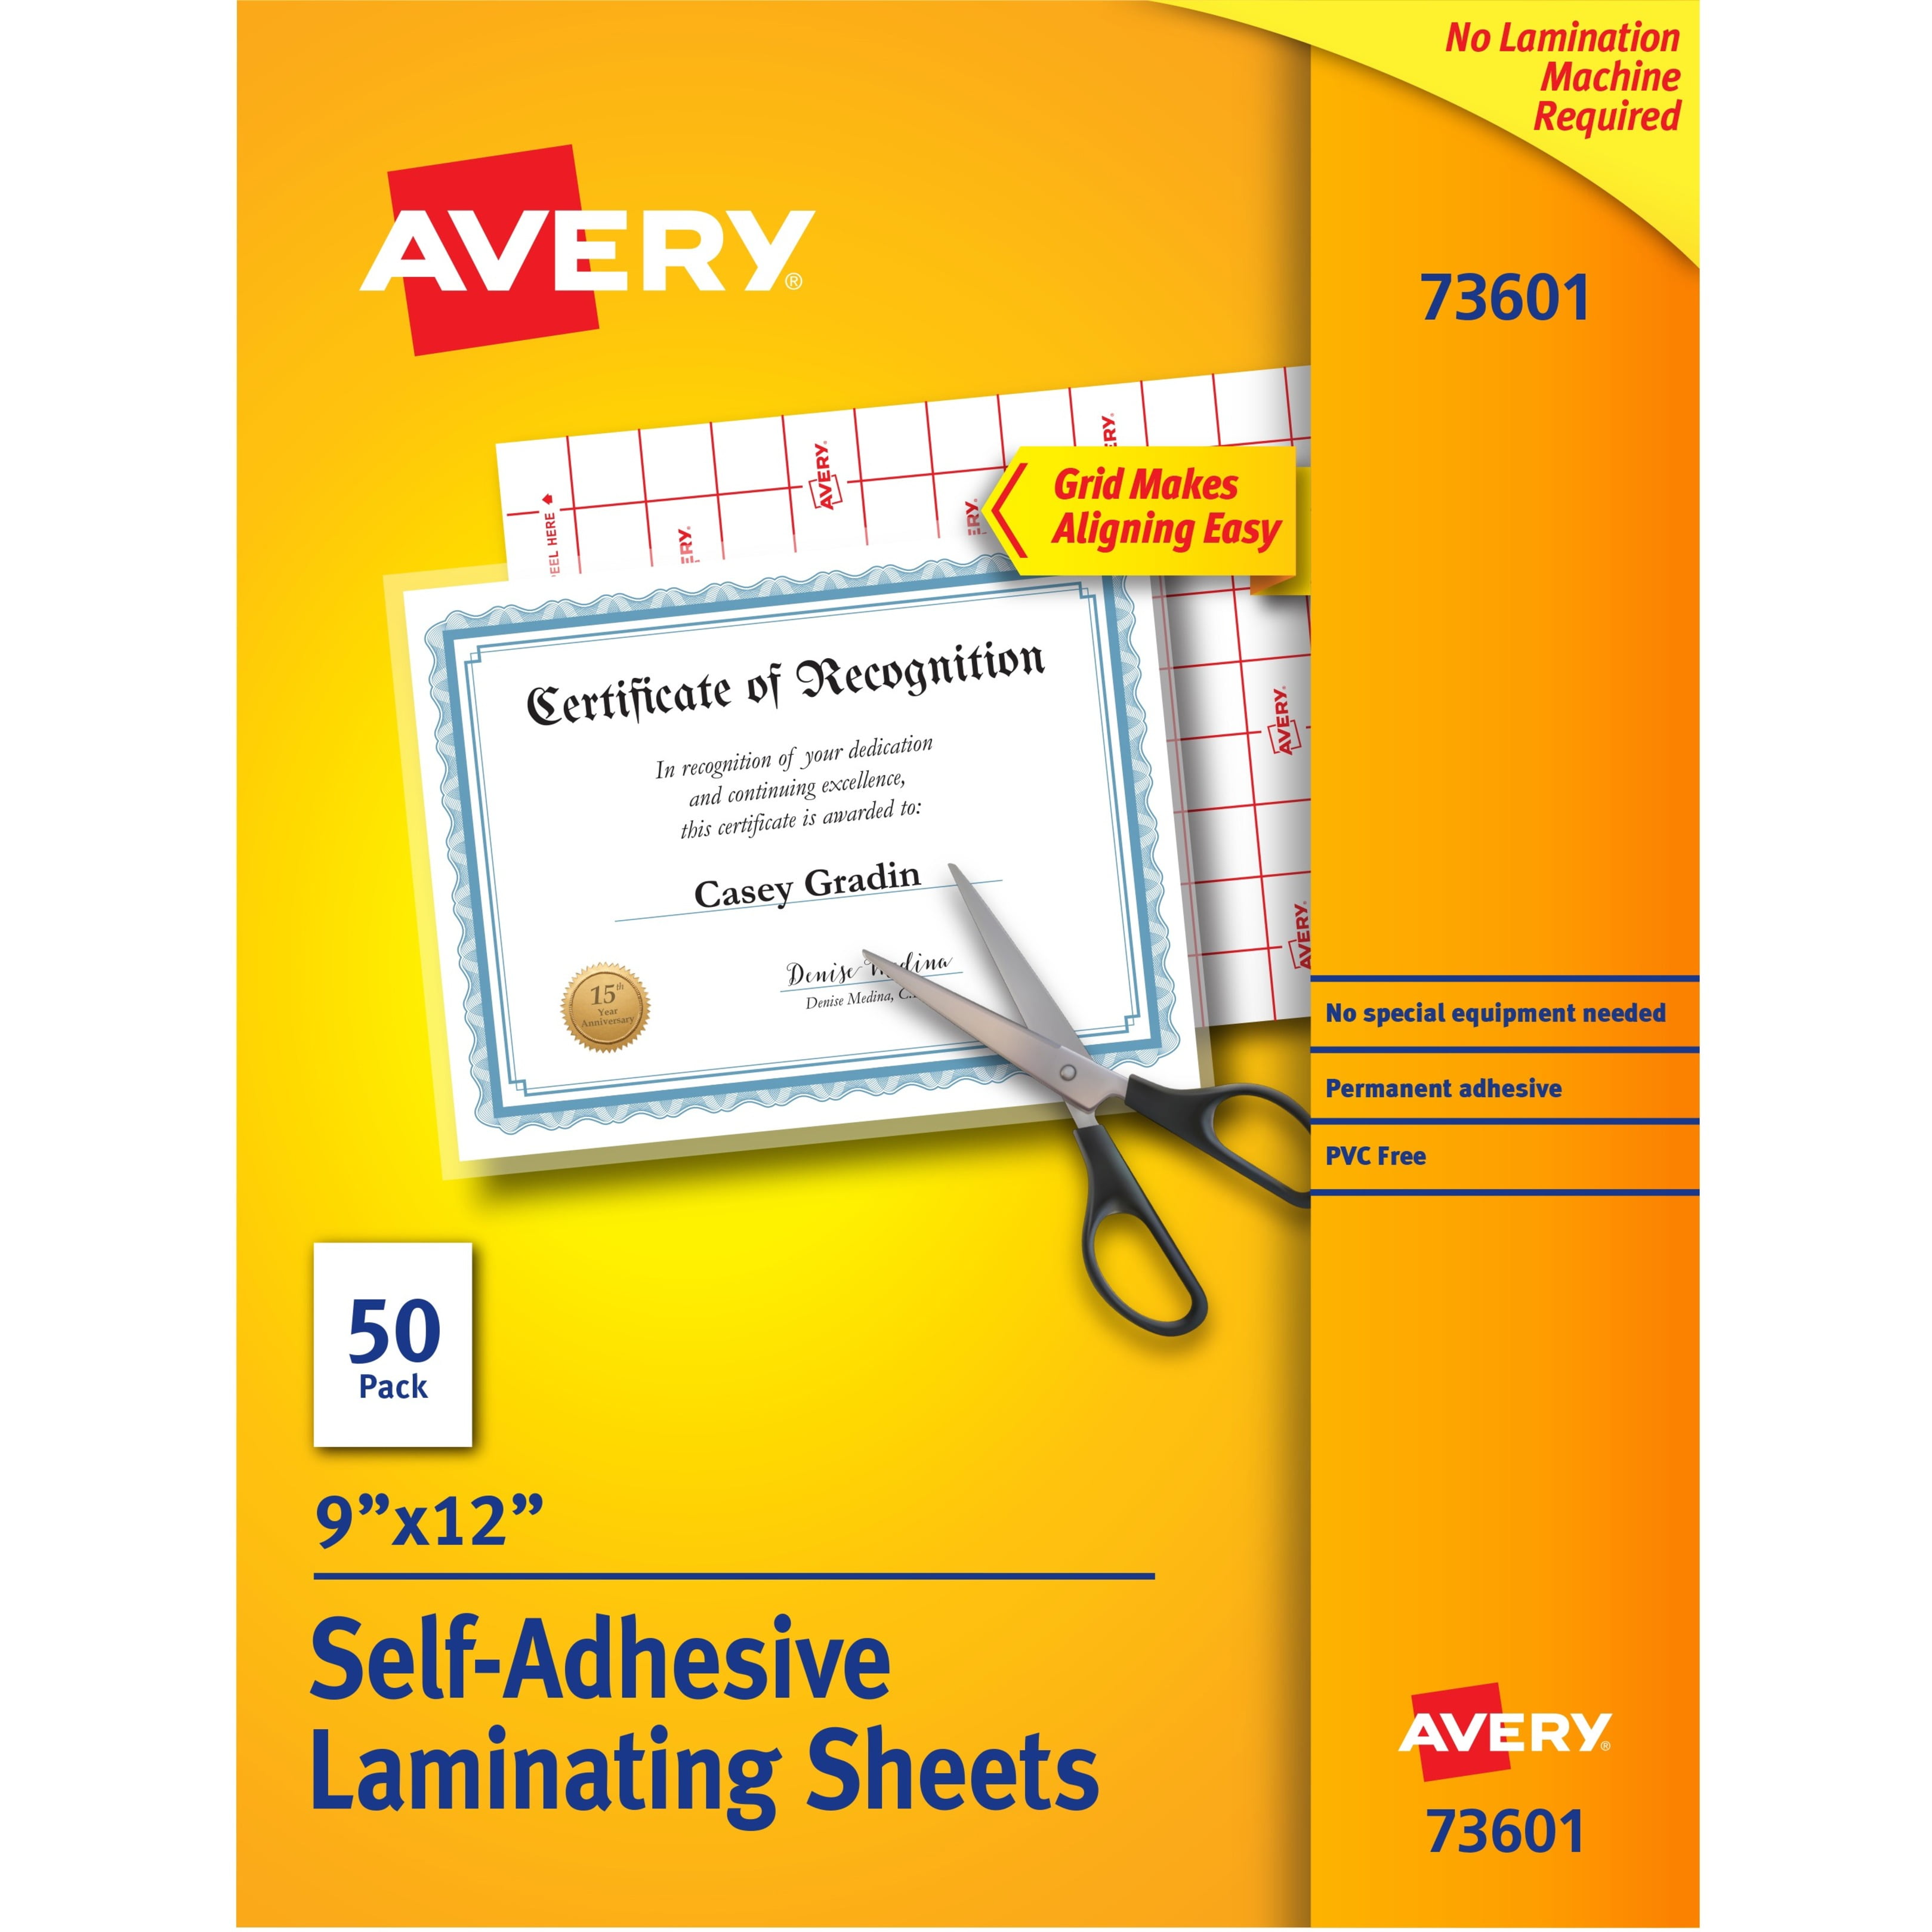 Hot Thermal Laminating Pouch 11.5x17.5-3.5mil Thickness for 11x17 Documents Sealed Inkuway 11.5x17.5x100-80um